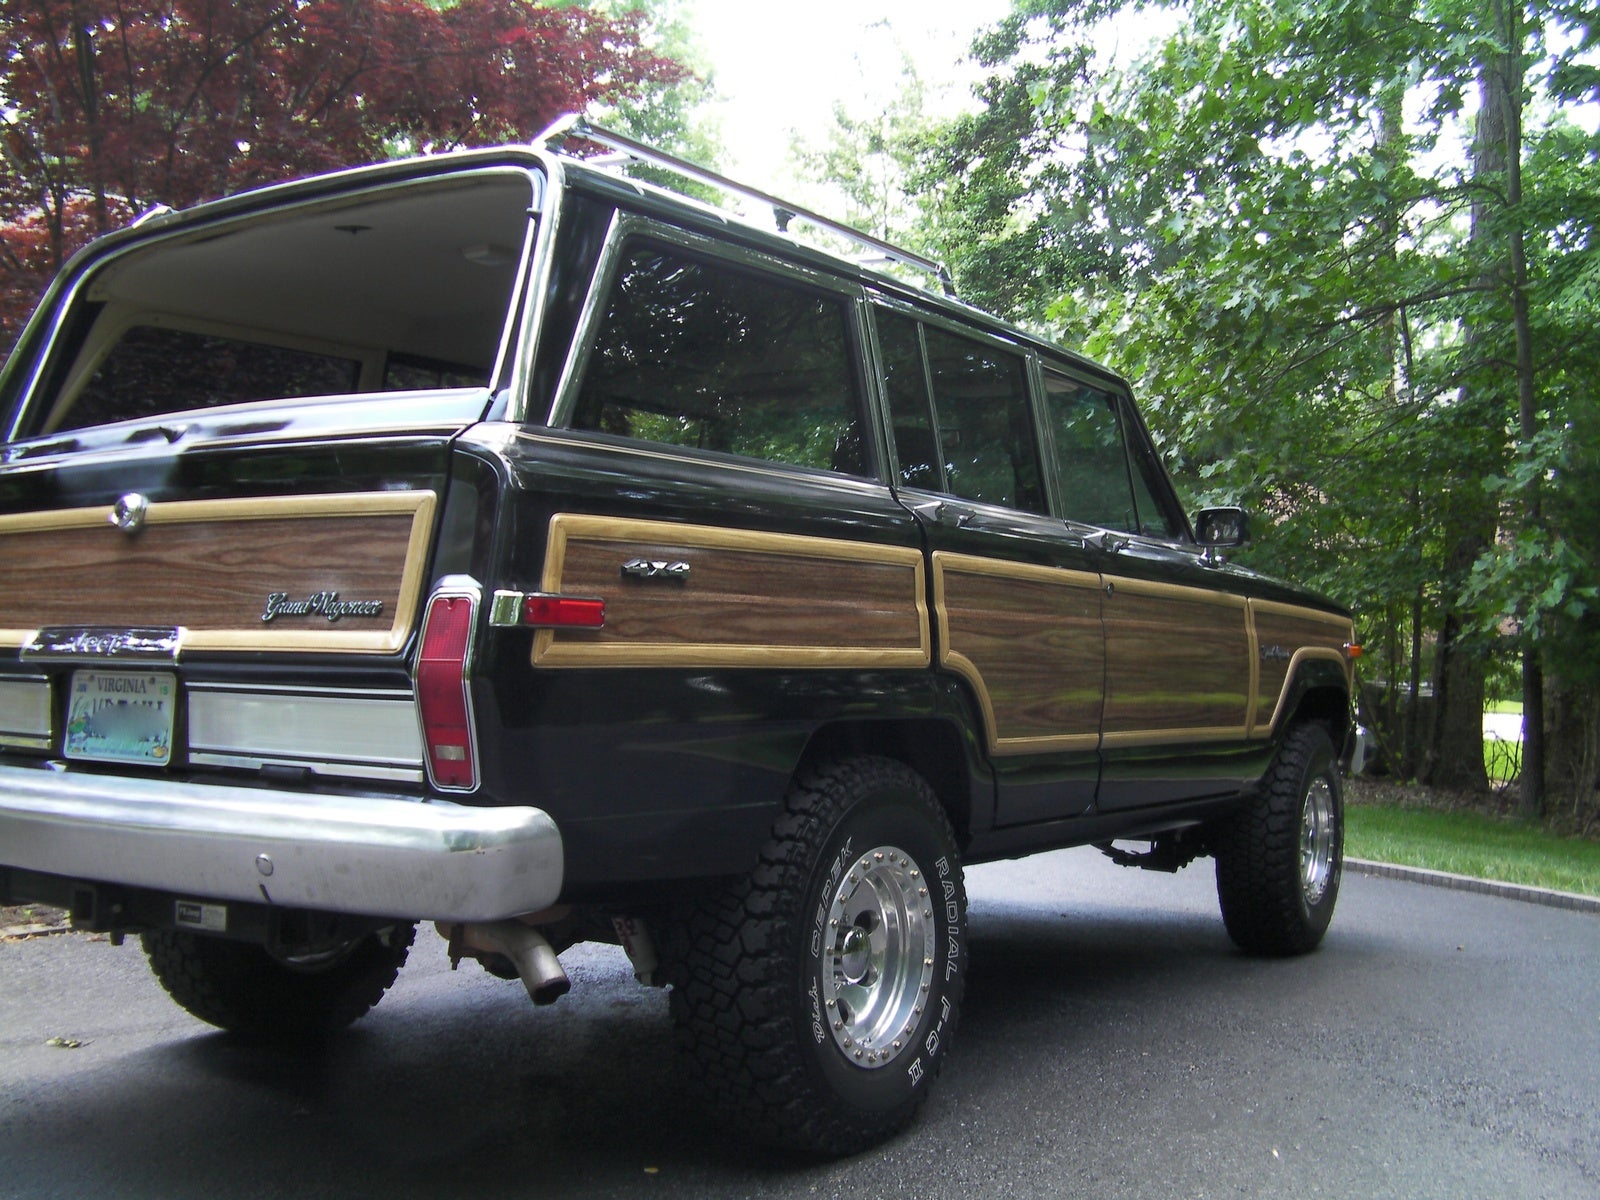 1989 Jeep grand wagoneer review #4